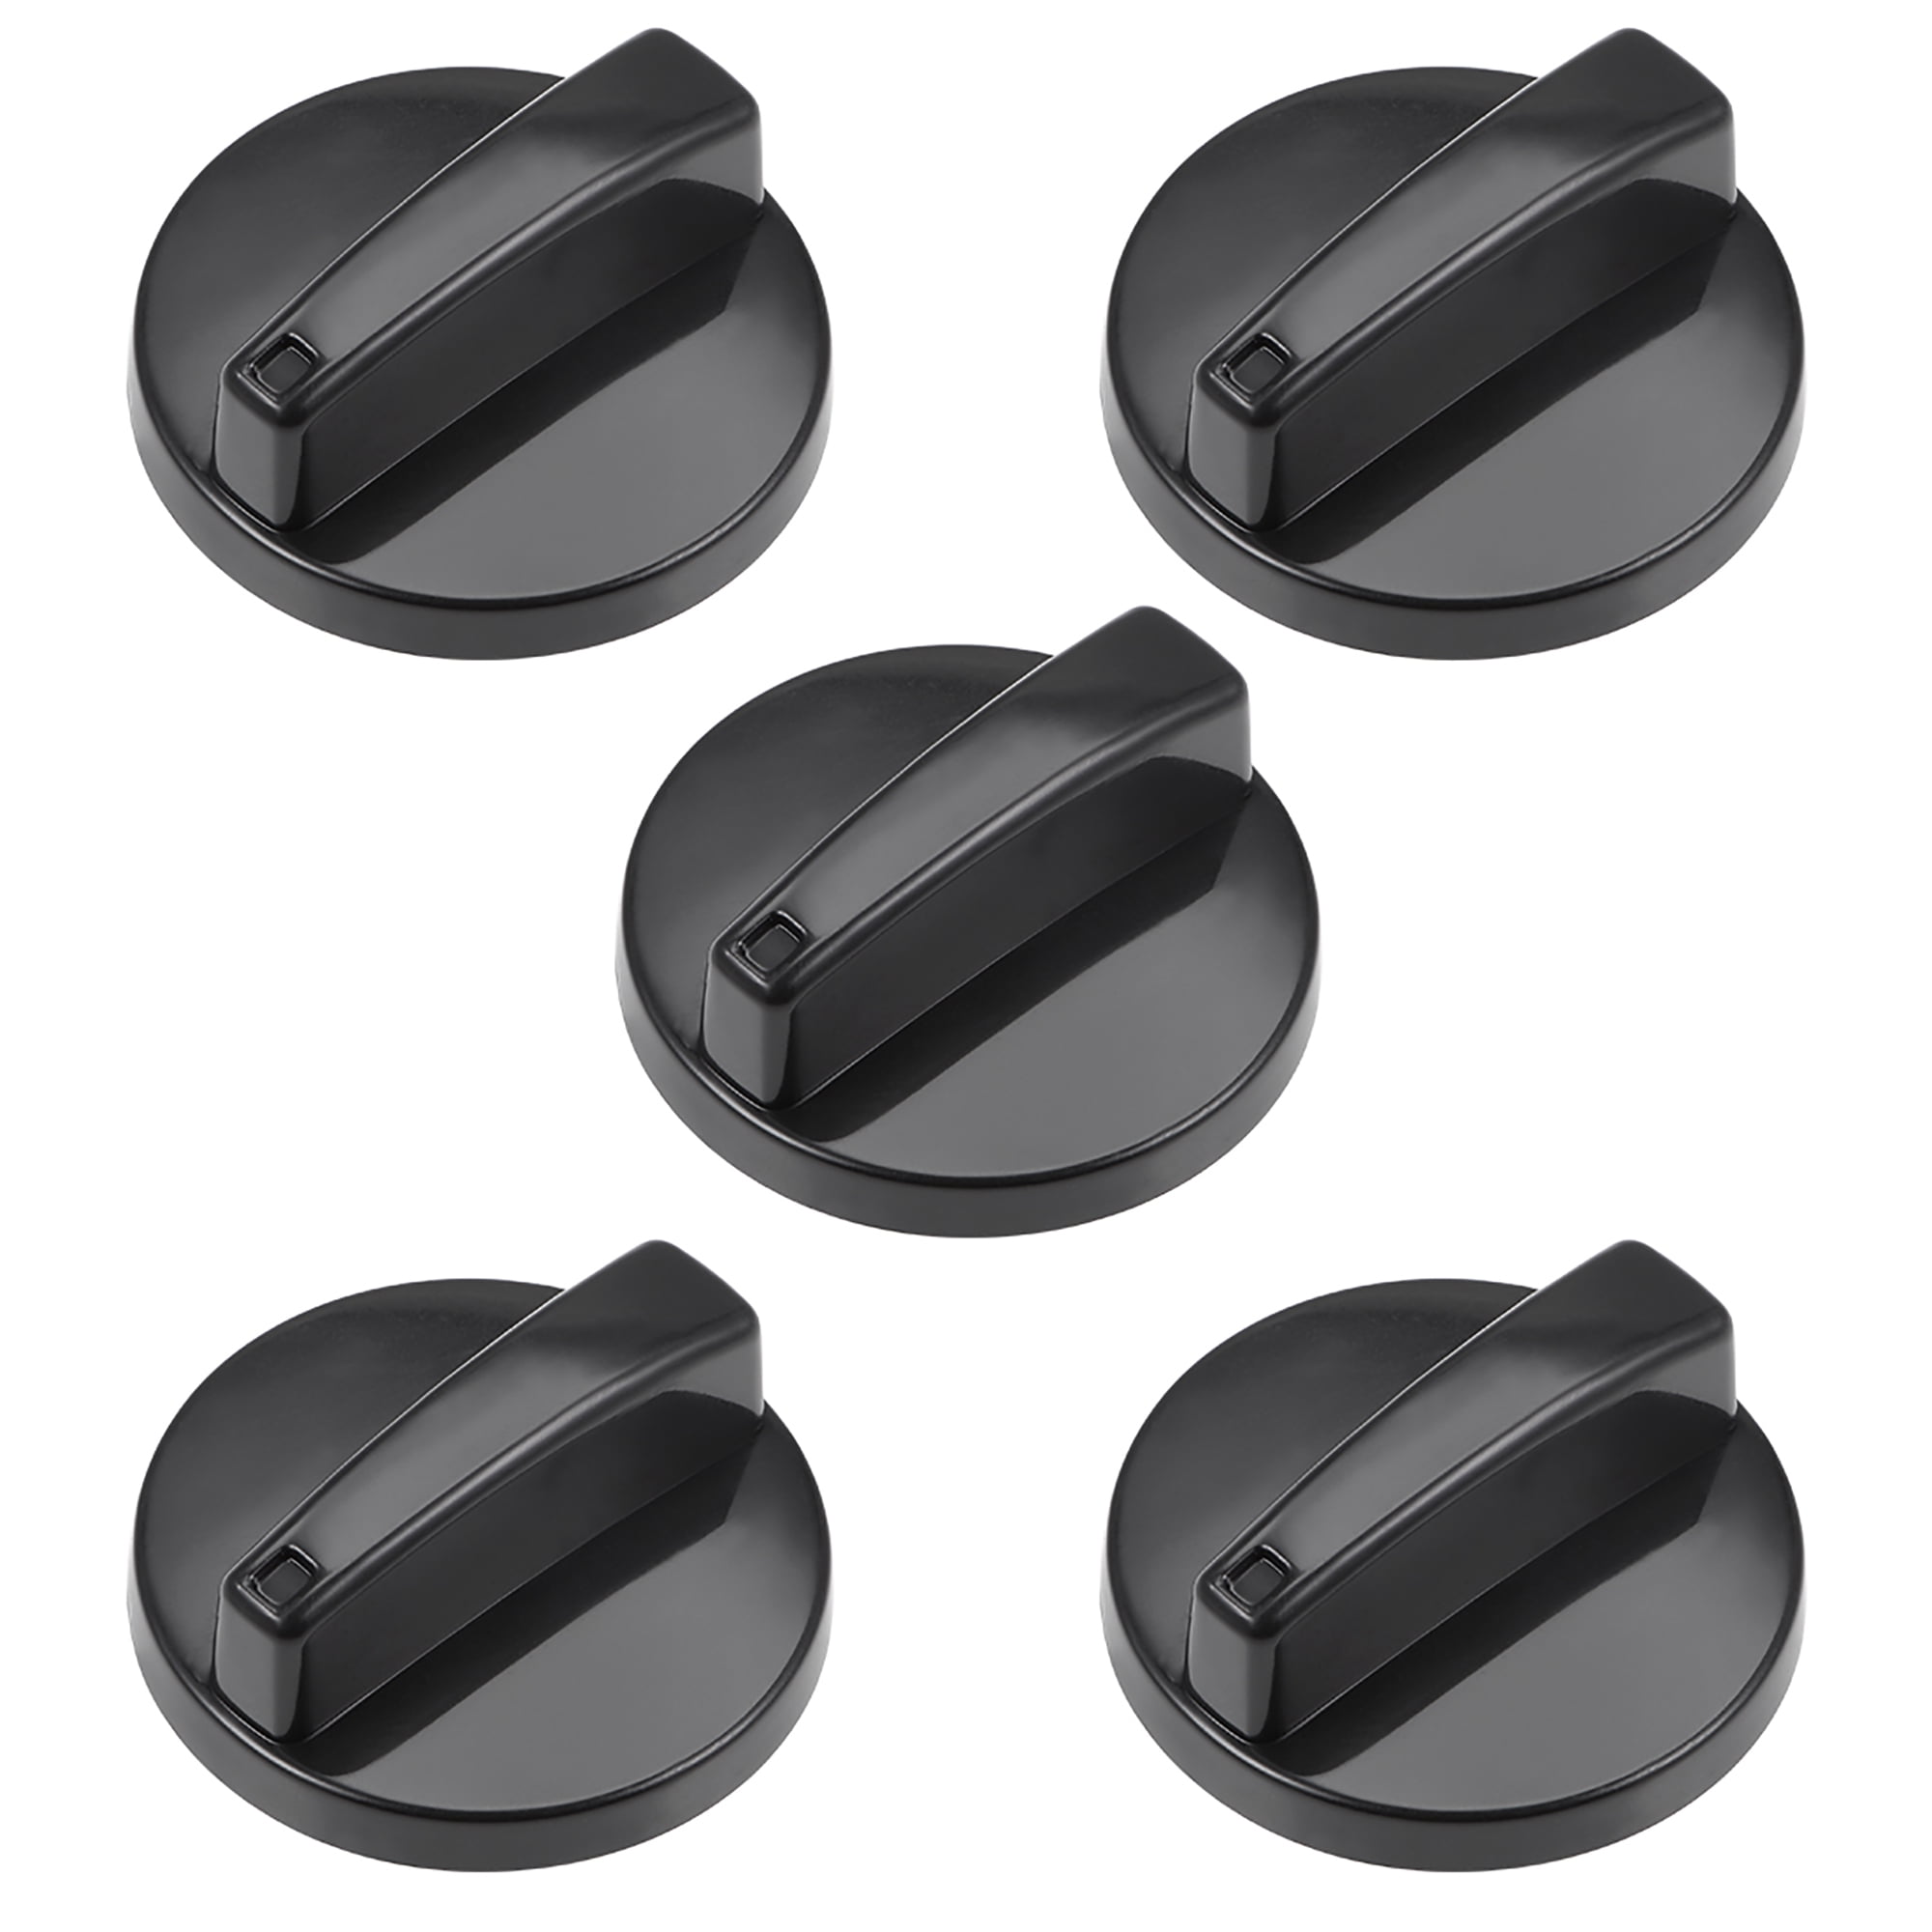 5 x Black Knob with Blue Pointer Free Shipping Soft Touch High Quality